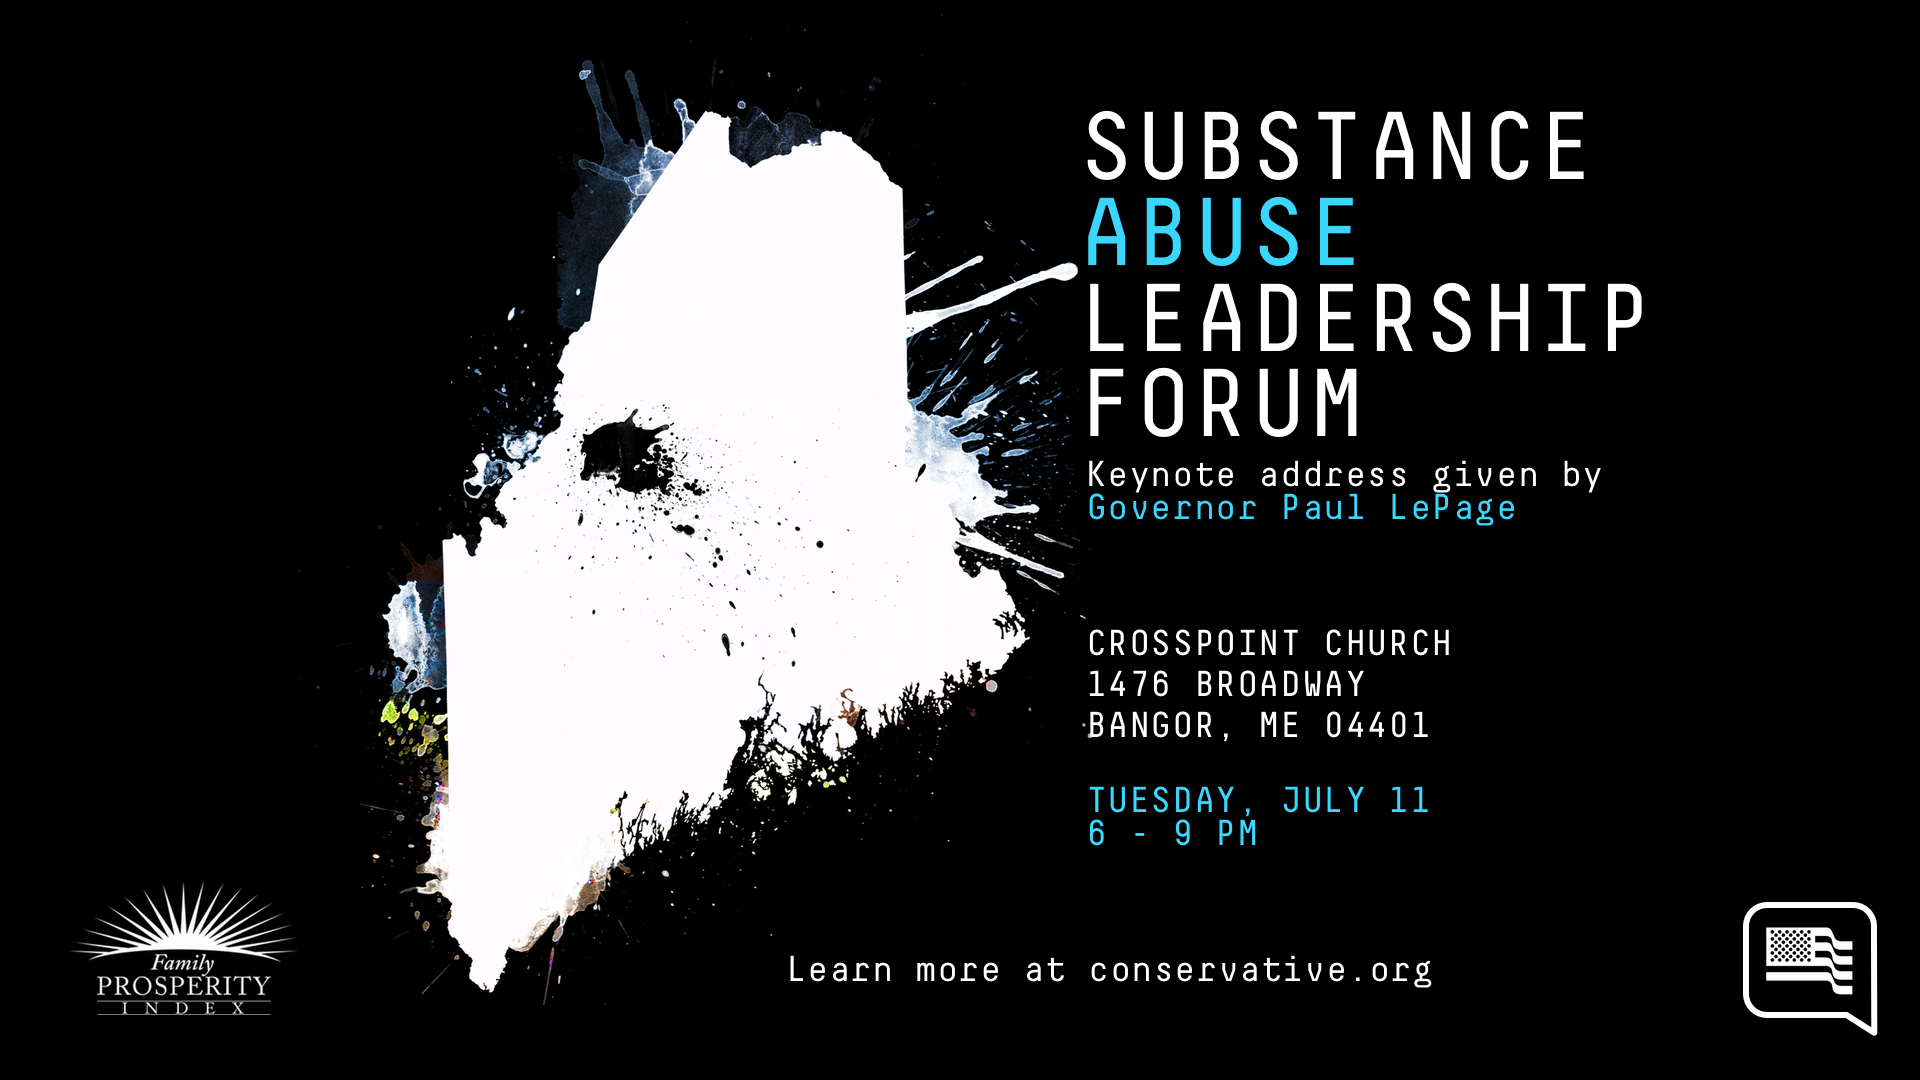 Watch the Substance Abuse Leadership Forum